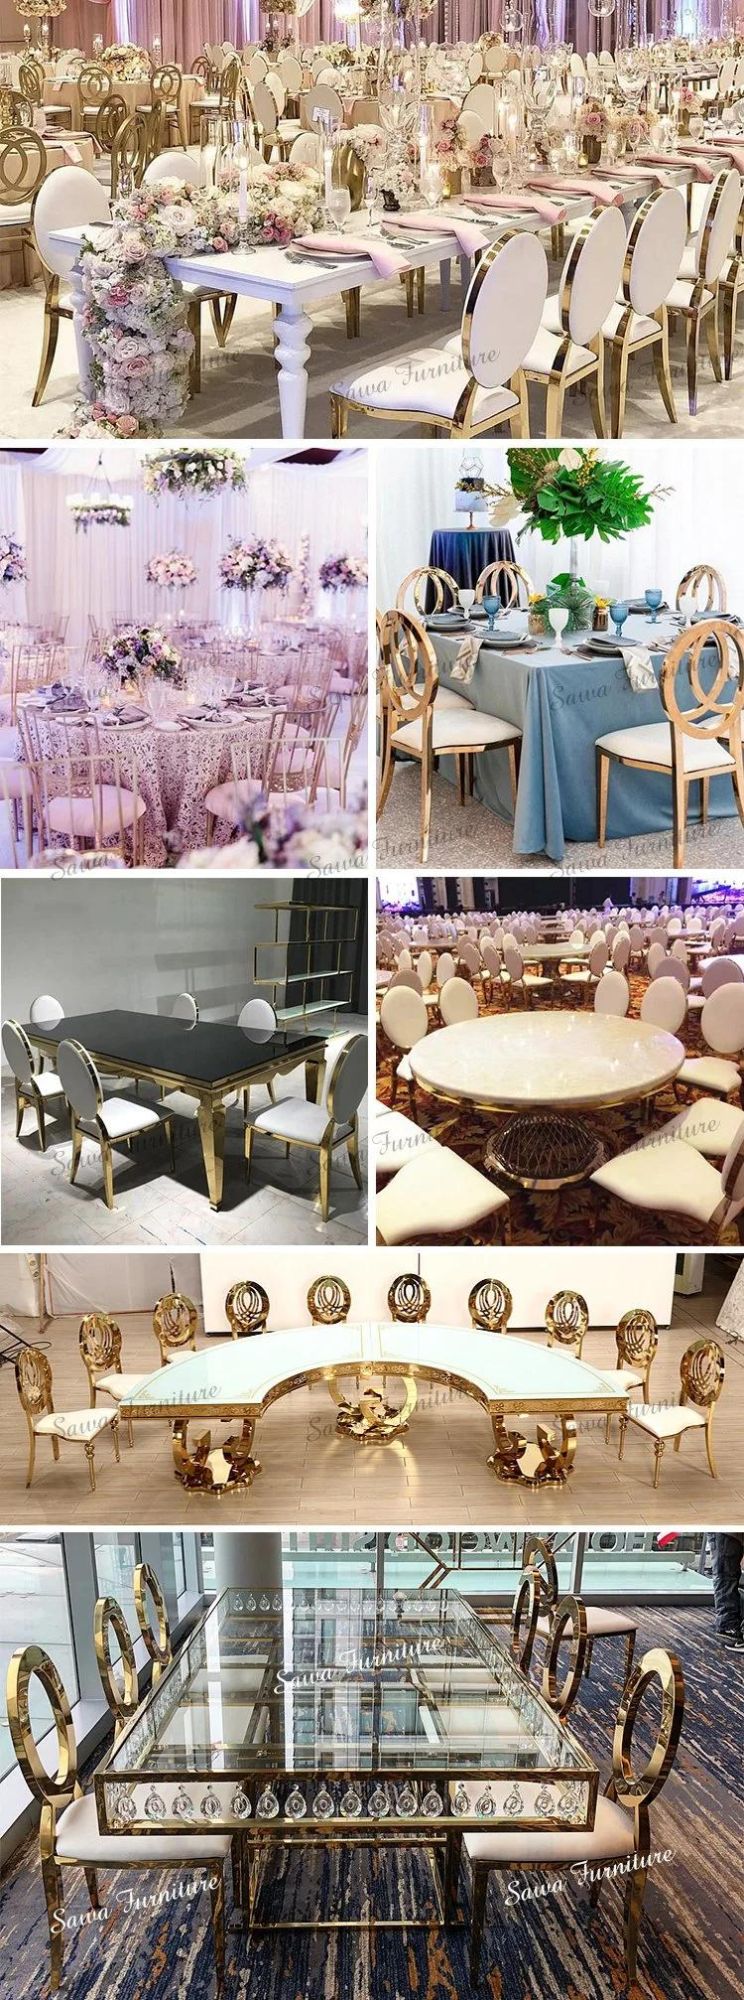 Modern Elegant Leisure Chairs for Event Wedding Banquet Chairs Dining Room Chairs Kid Chairs